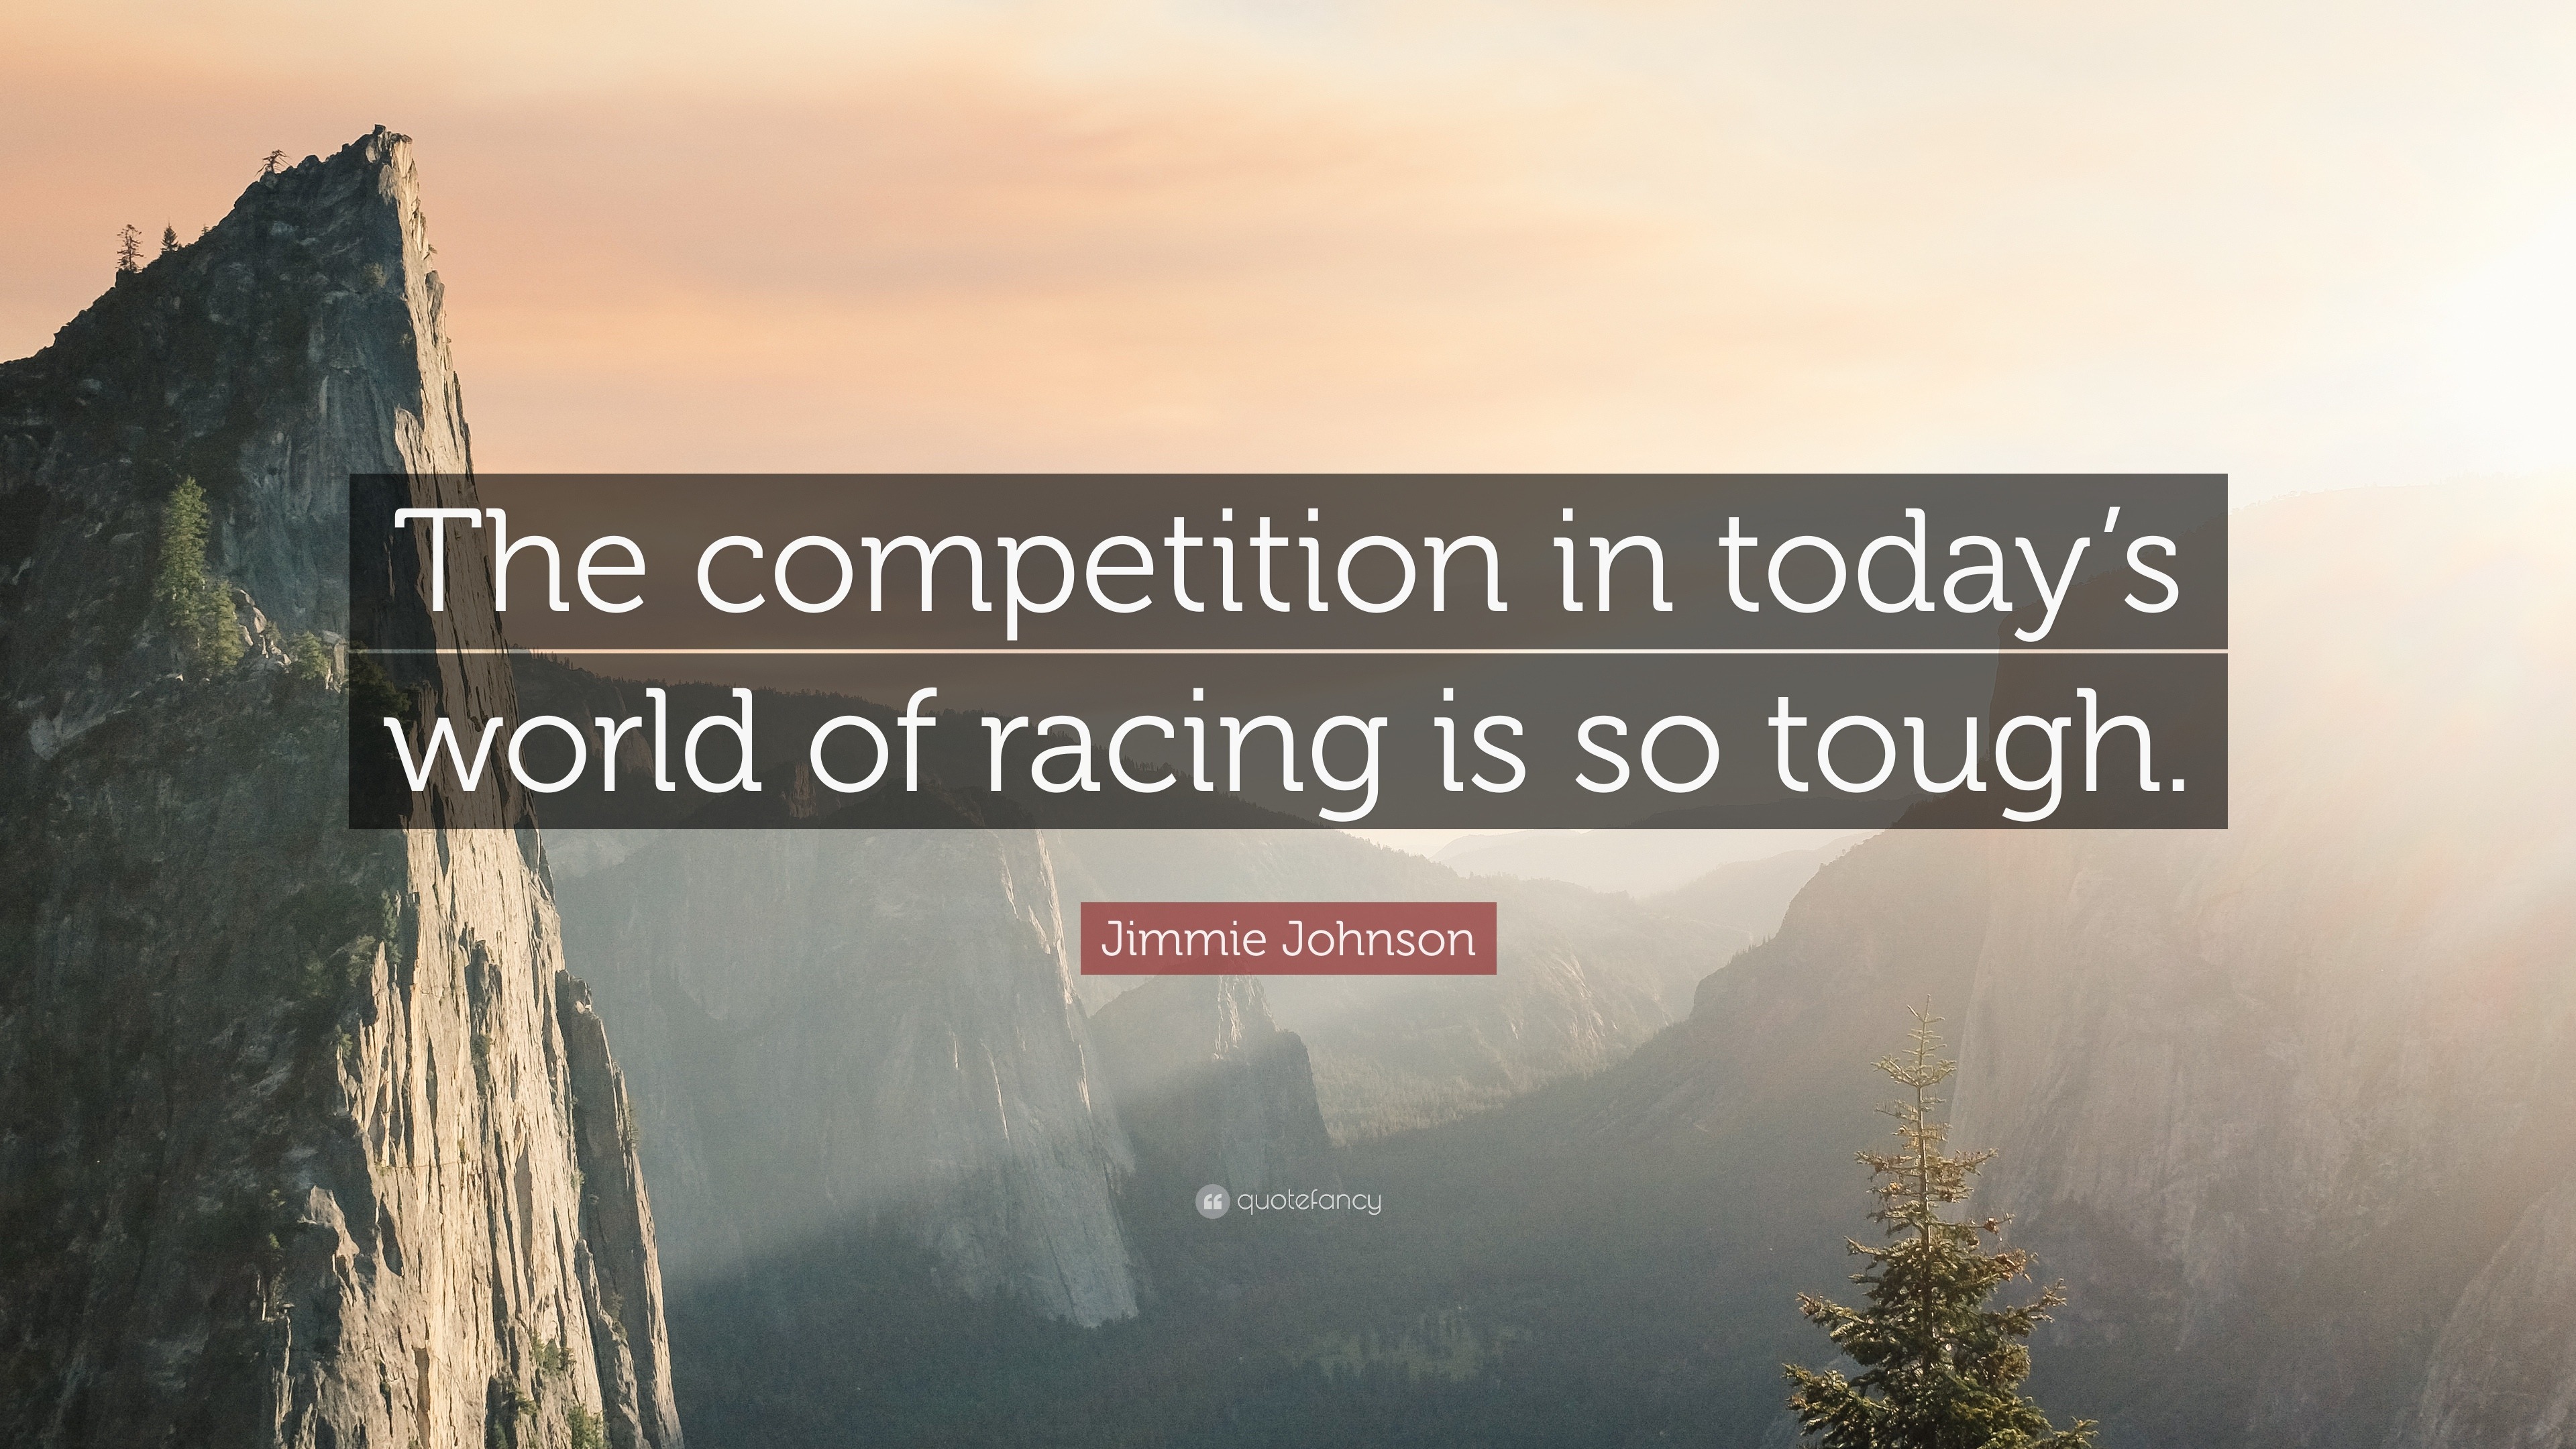 Jimmie Johnson Quote: “The competition in today’s world of racing is so ...